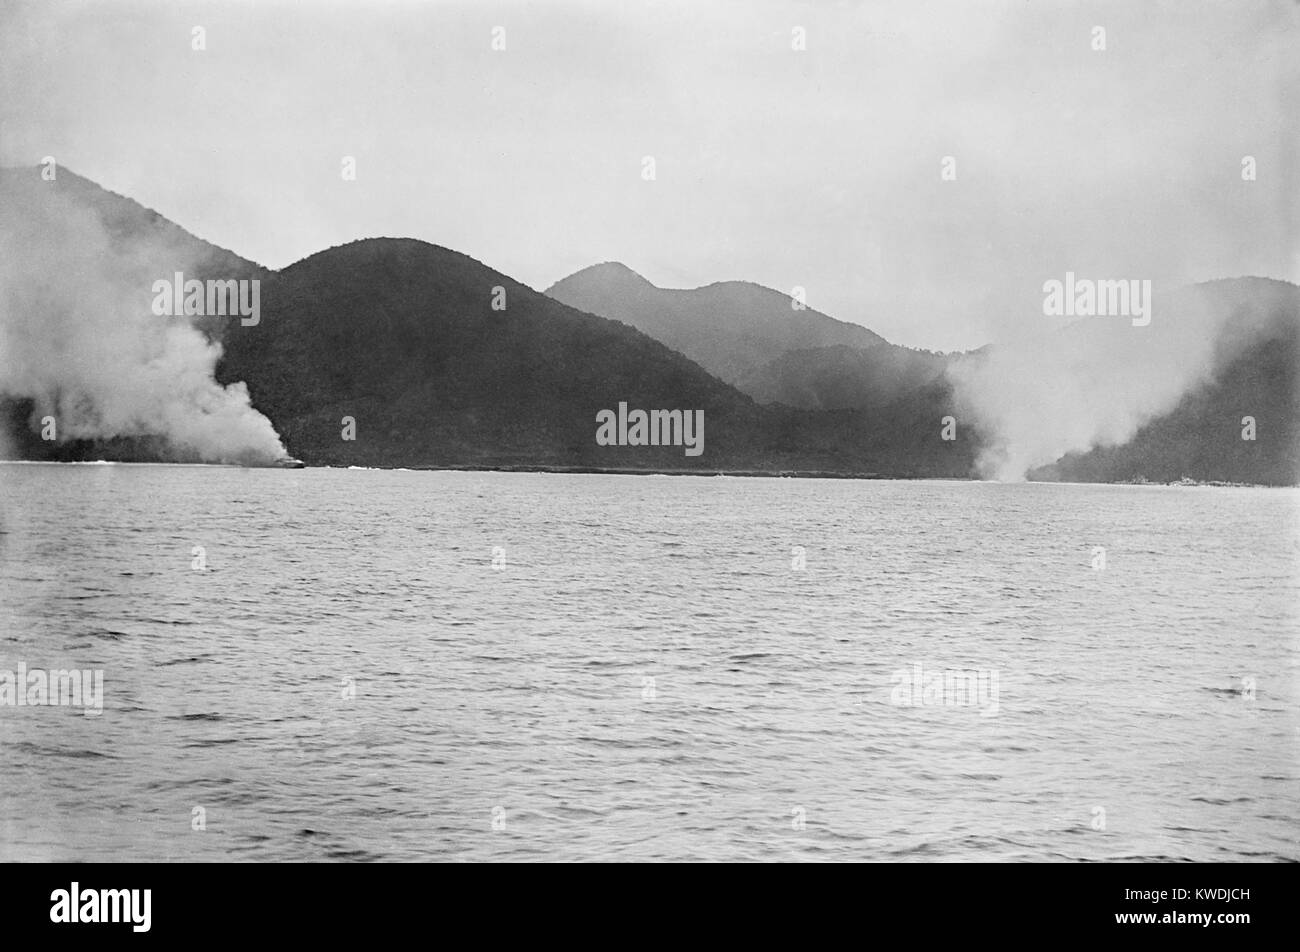 Oquendo and Maria Teresa, aground and burning during the Battle of Santiago, Spanish American War. July 3, 1898. The US destroyed the Spanish fleet, gaining control of the sea, leaving the Spanish troops stranded, and leading to Spanish surrender (BSLOC 2017 10 49) Stock Photo